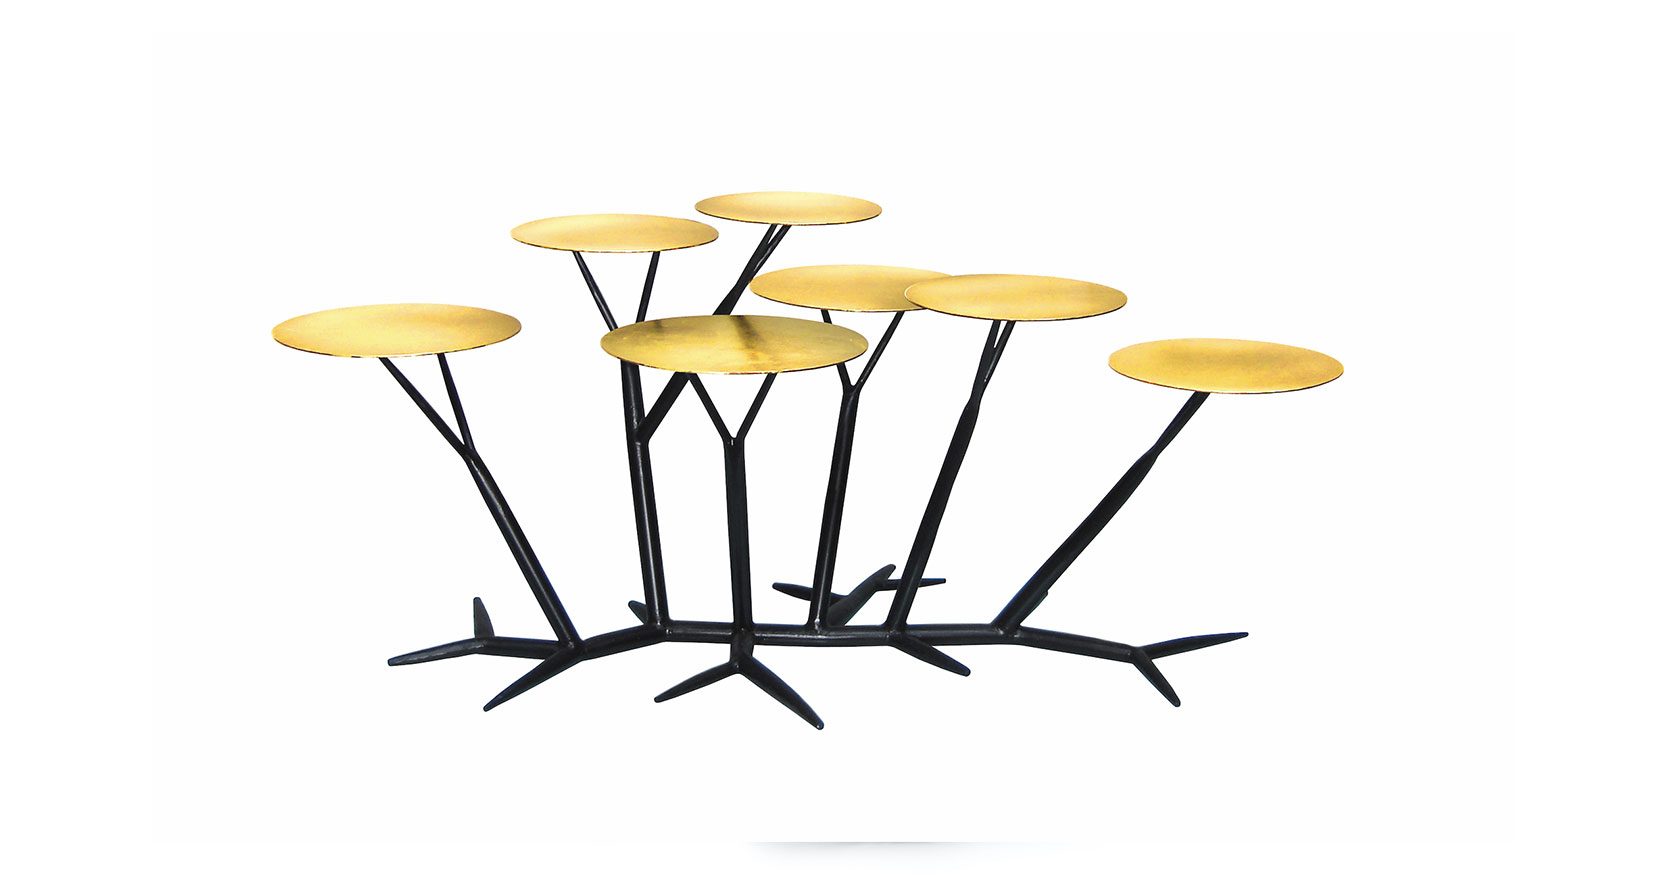 Eric Robin, spectacular sculptural coffee table, 7 round tops covered with gold leaf, which are joined by 7 legs and a base in the shape of black sculpted iron branches